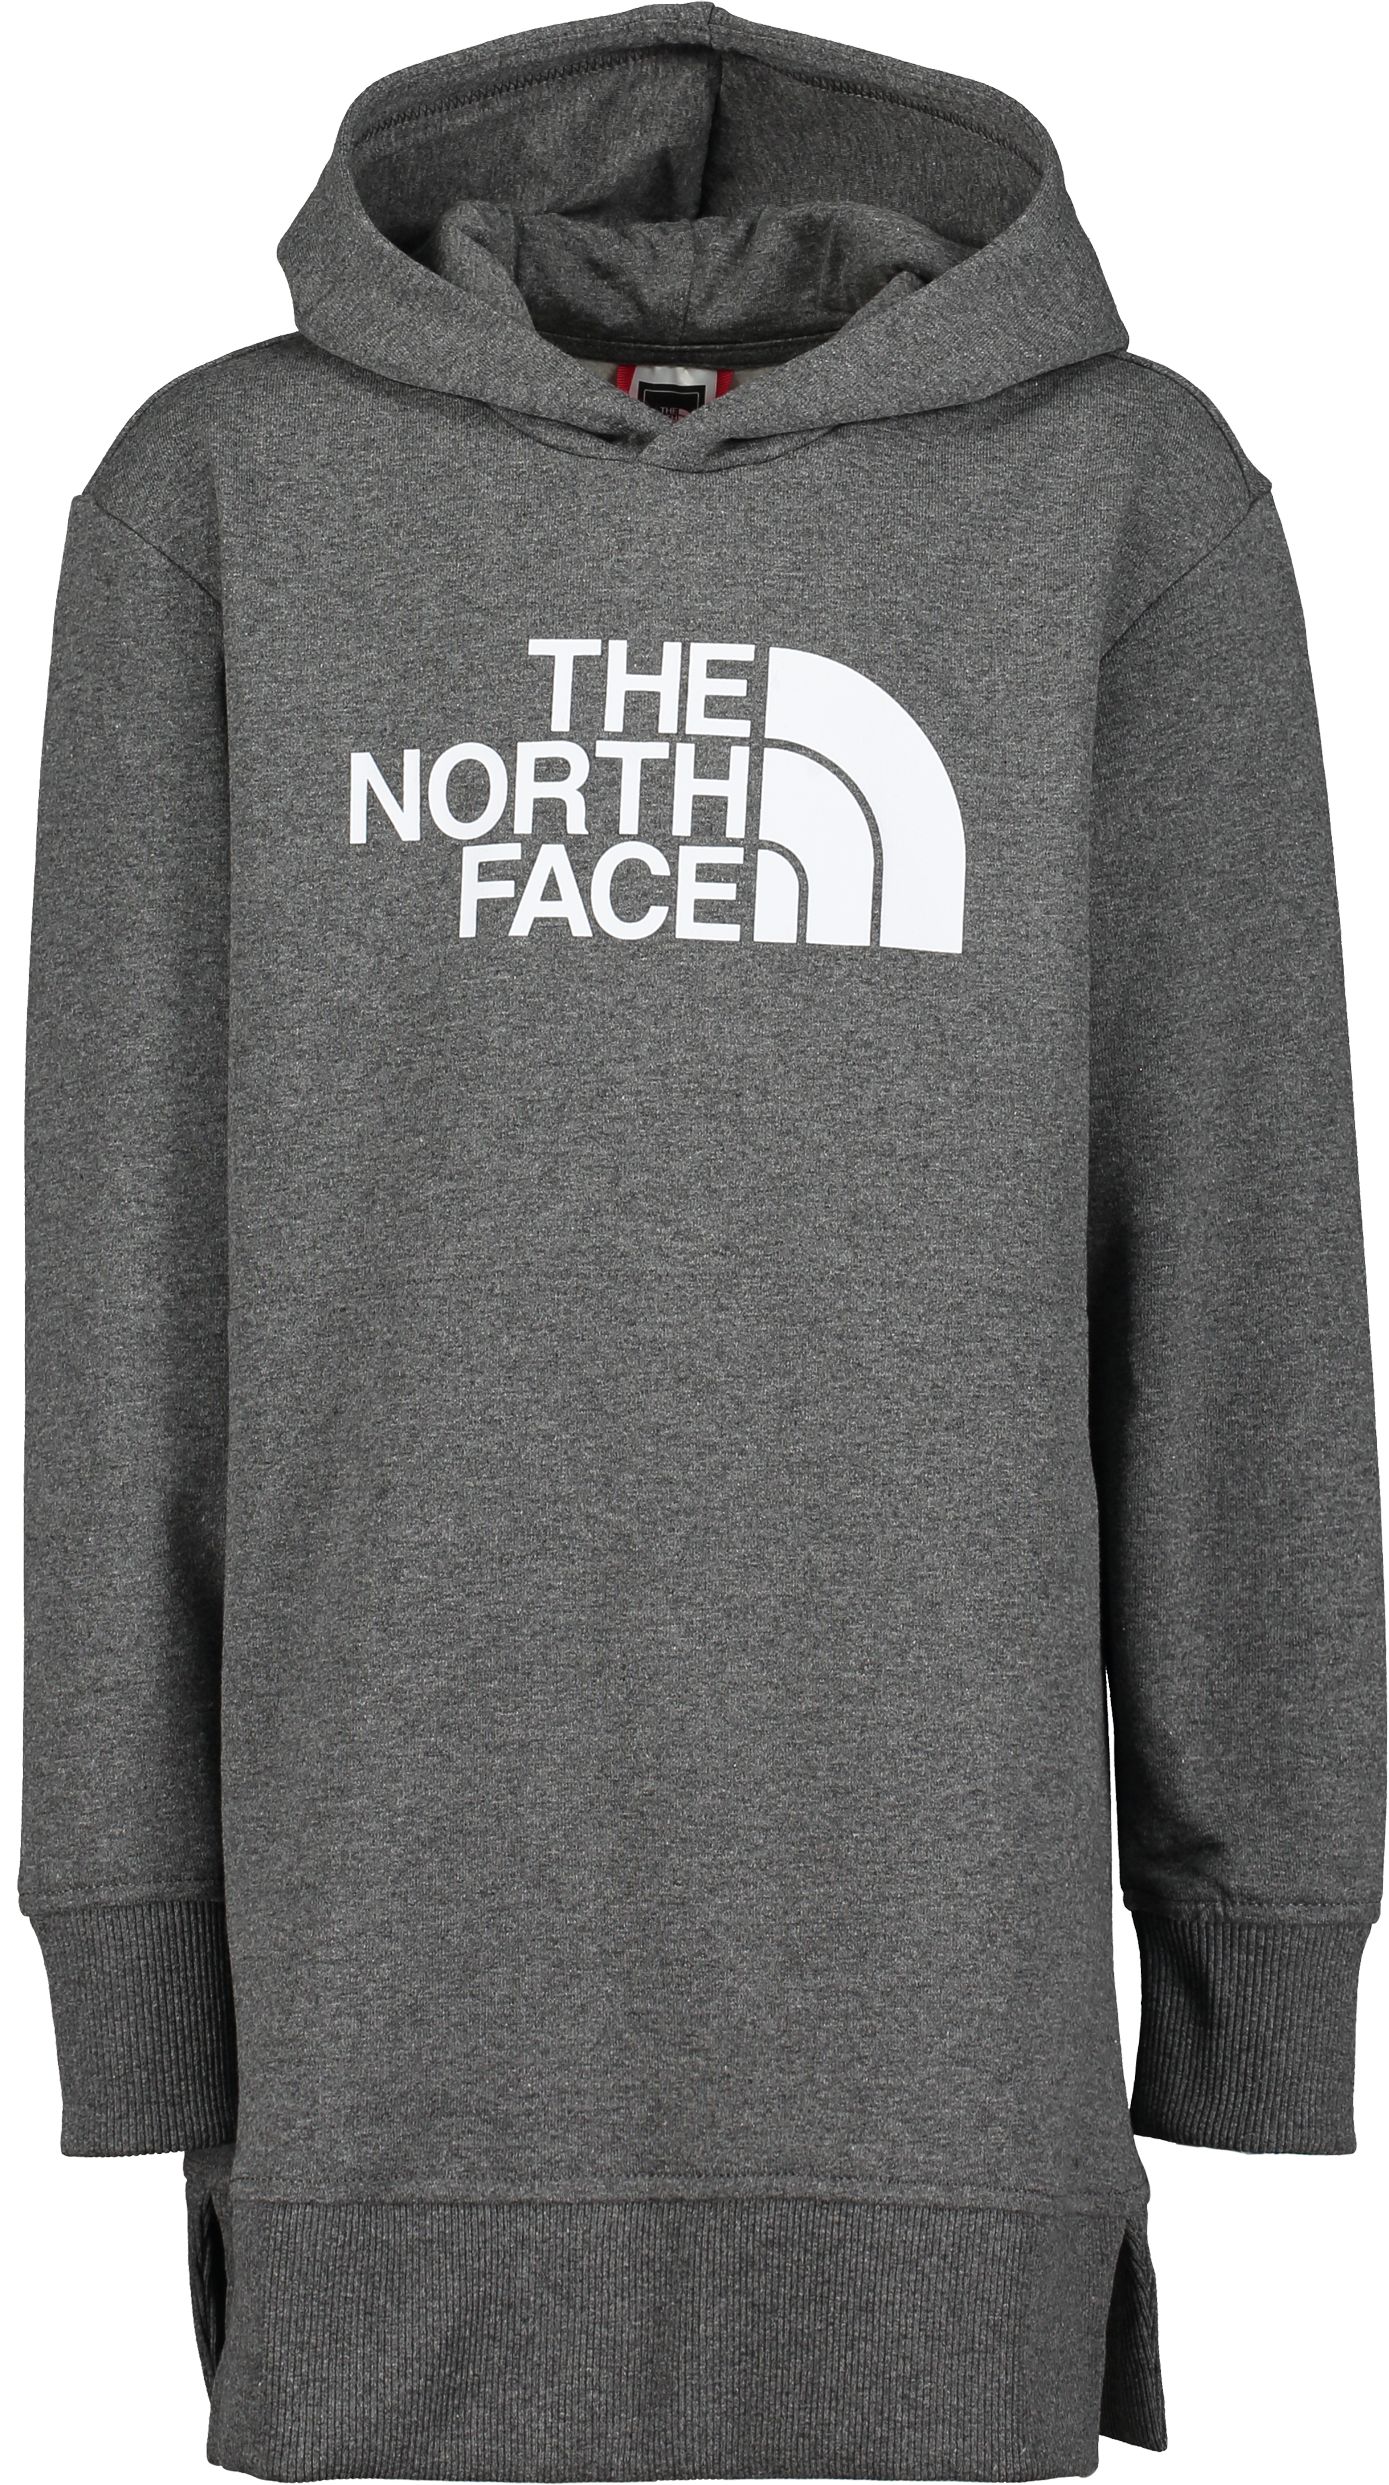 THE NORTH FACE, G GRAPHIC RELAX PO HOODIE